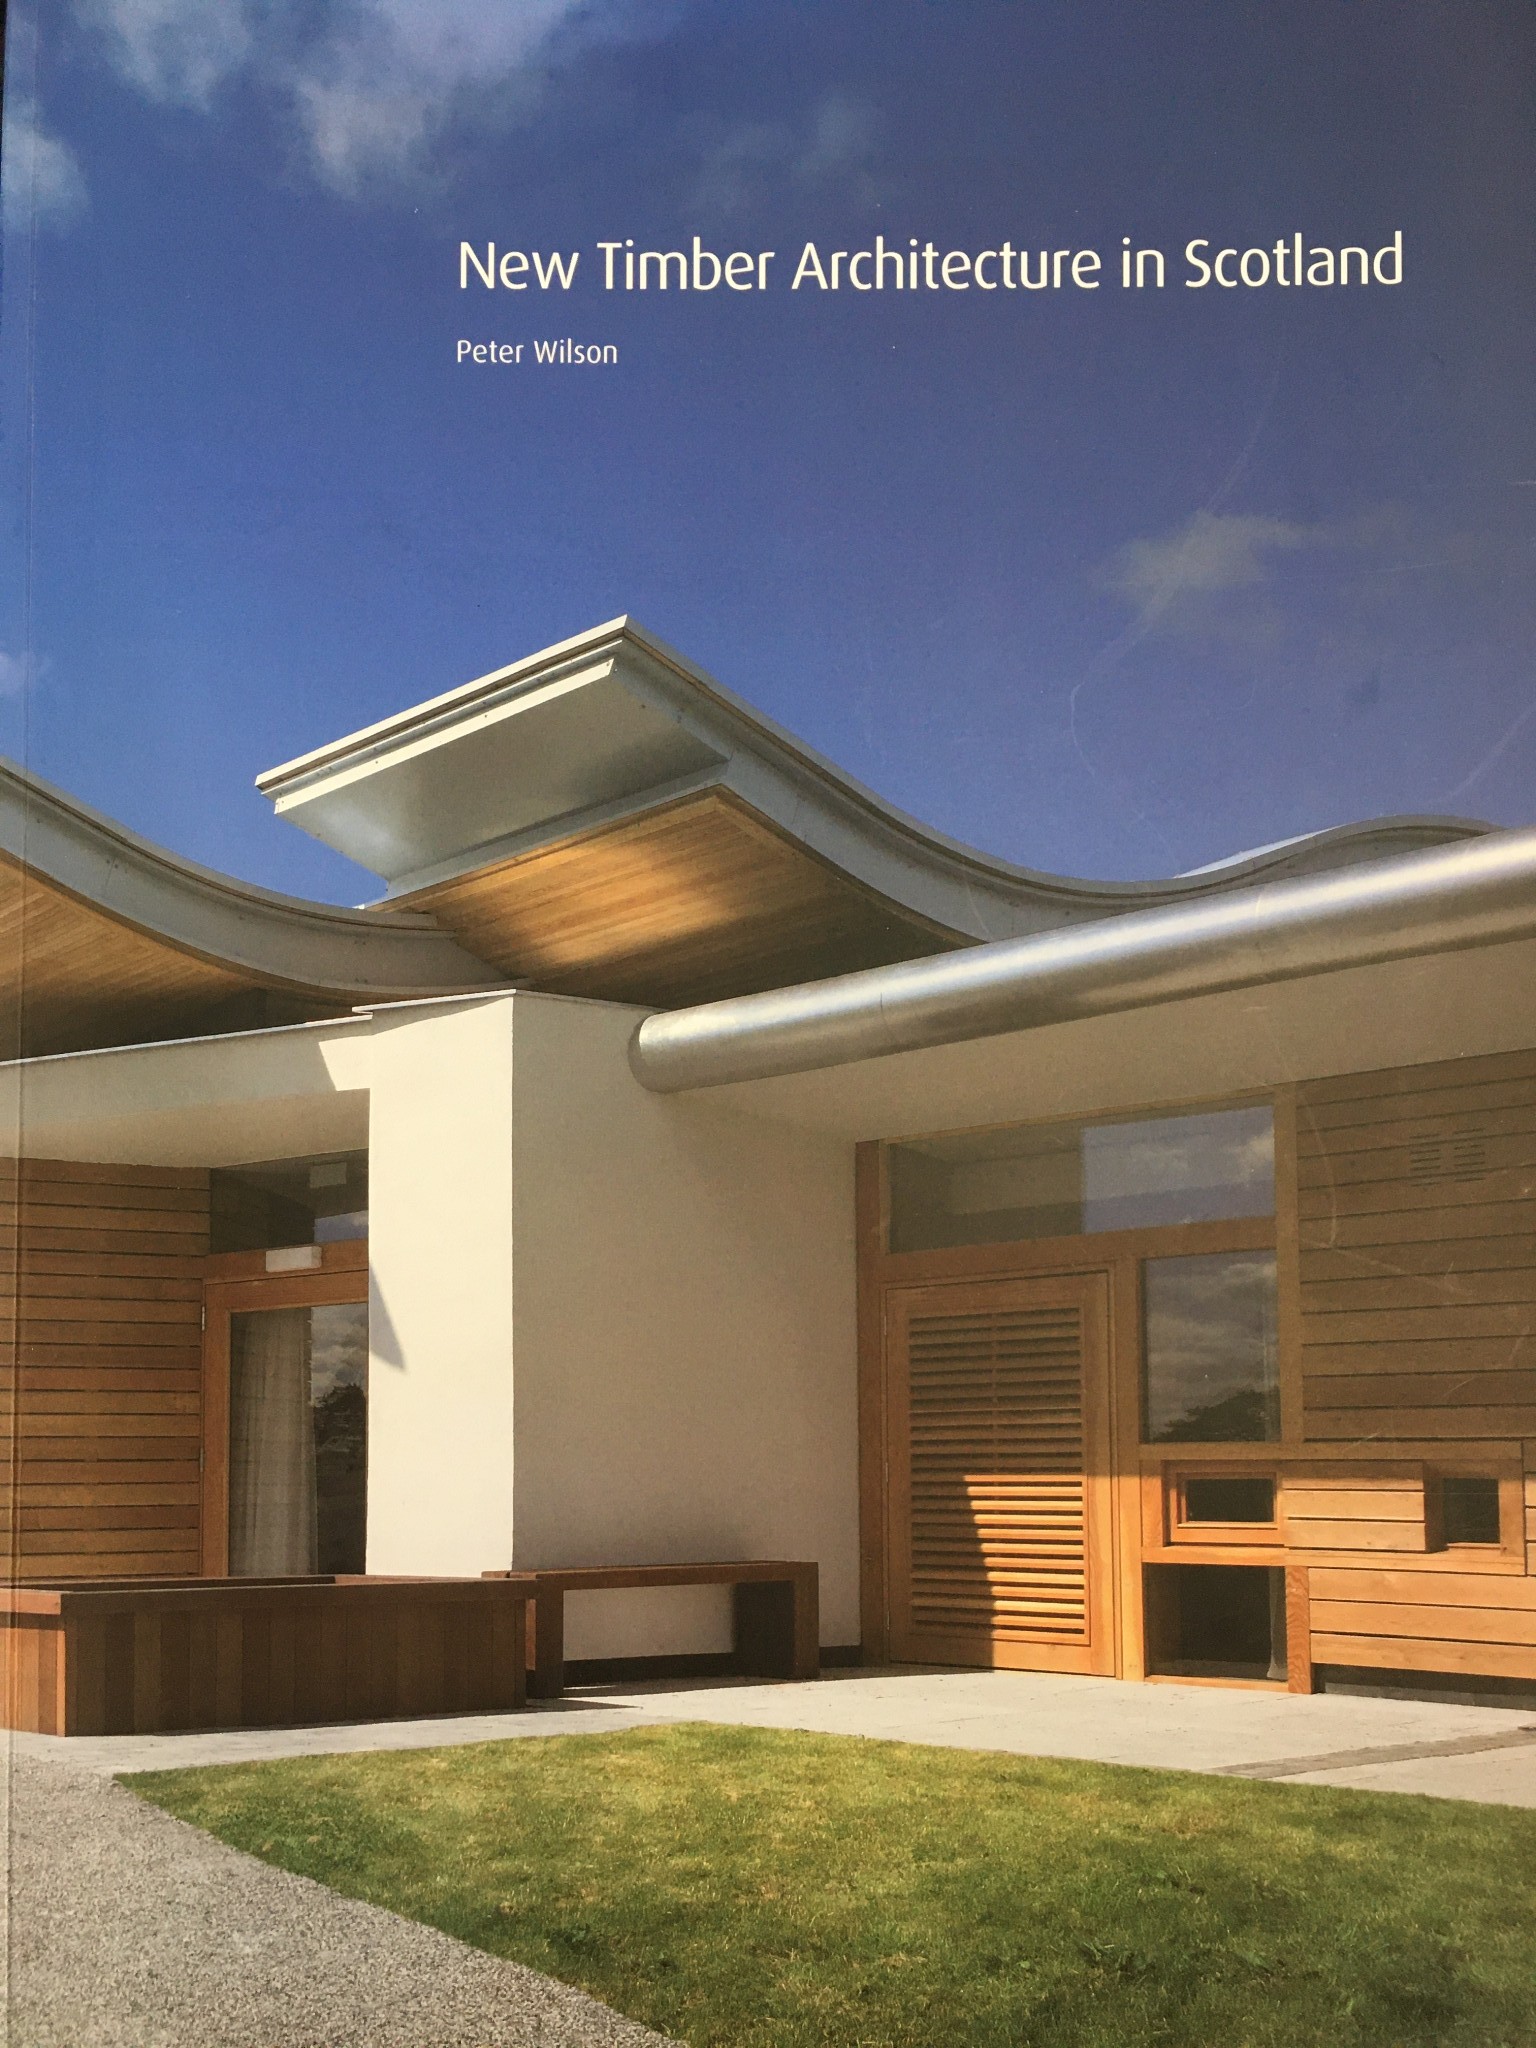 New Timber Architecture in Scotland by Peter Wilson (Book)